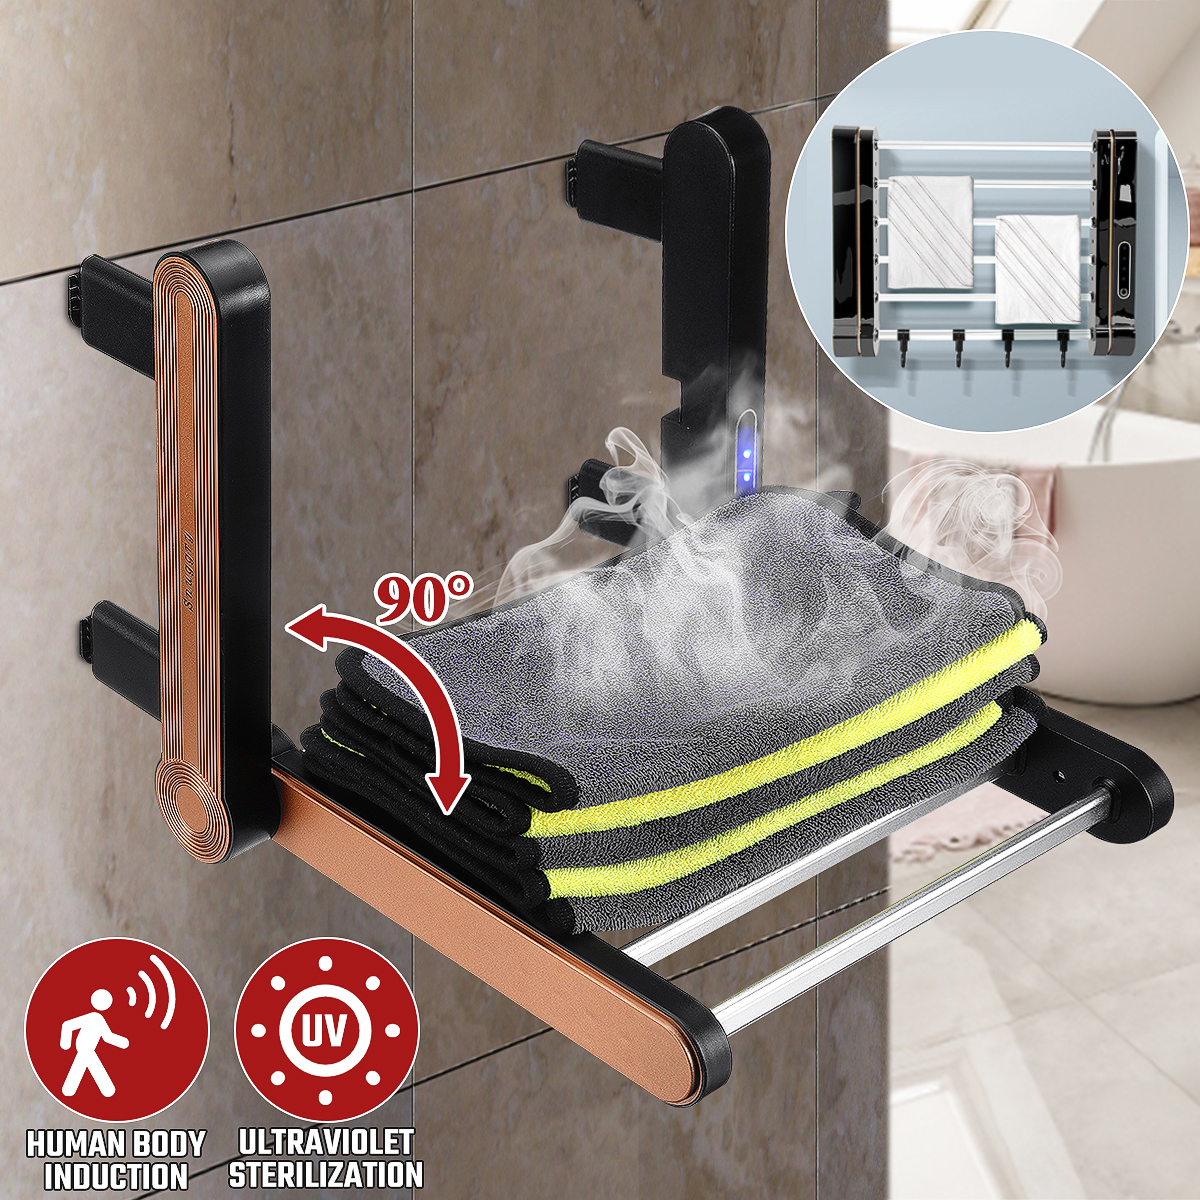 Sterilization-Heating-Household-Intelligent-Induction-disinfection-Towel-Rack-UV-Electric-Heating-Co-1928691-5